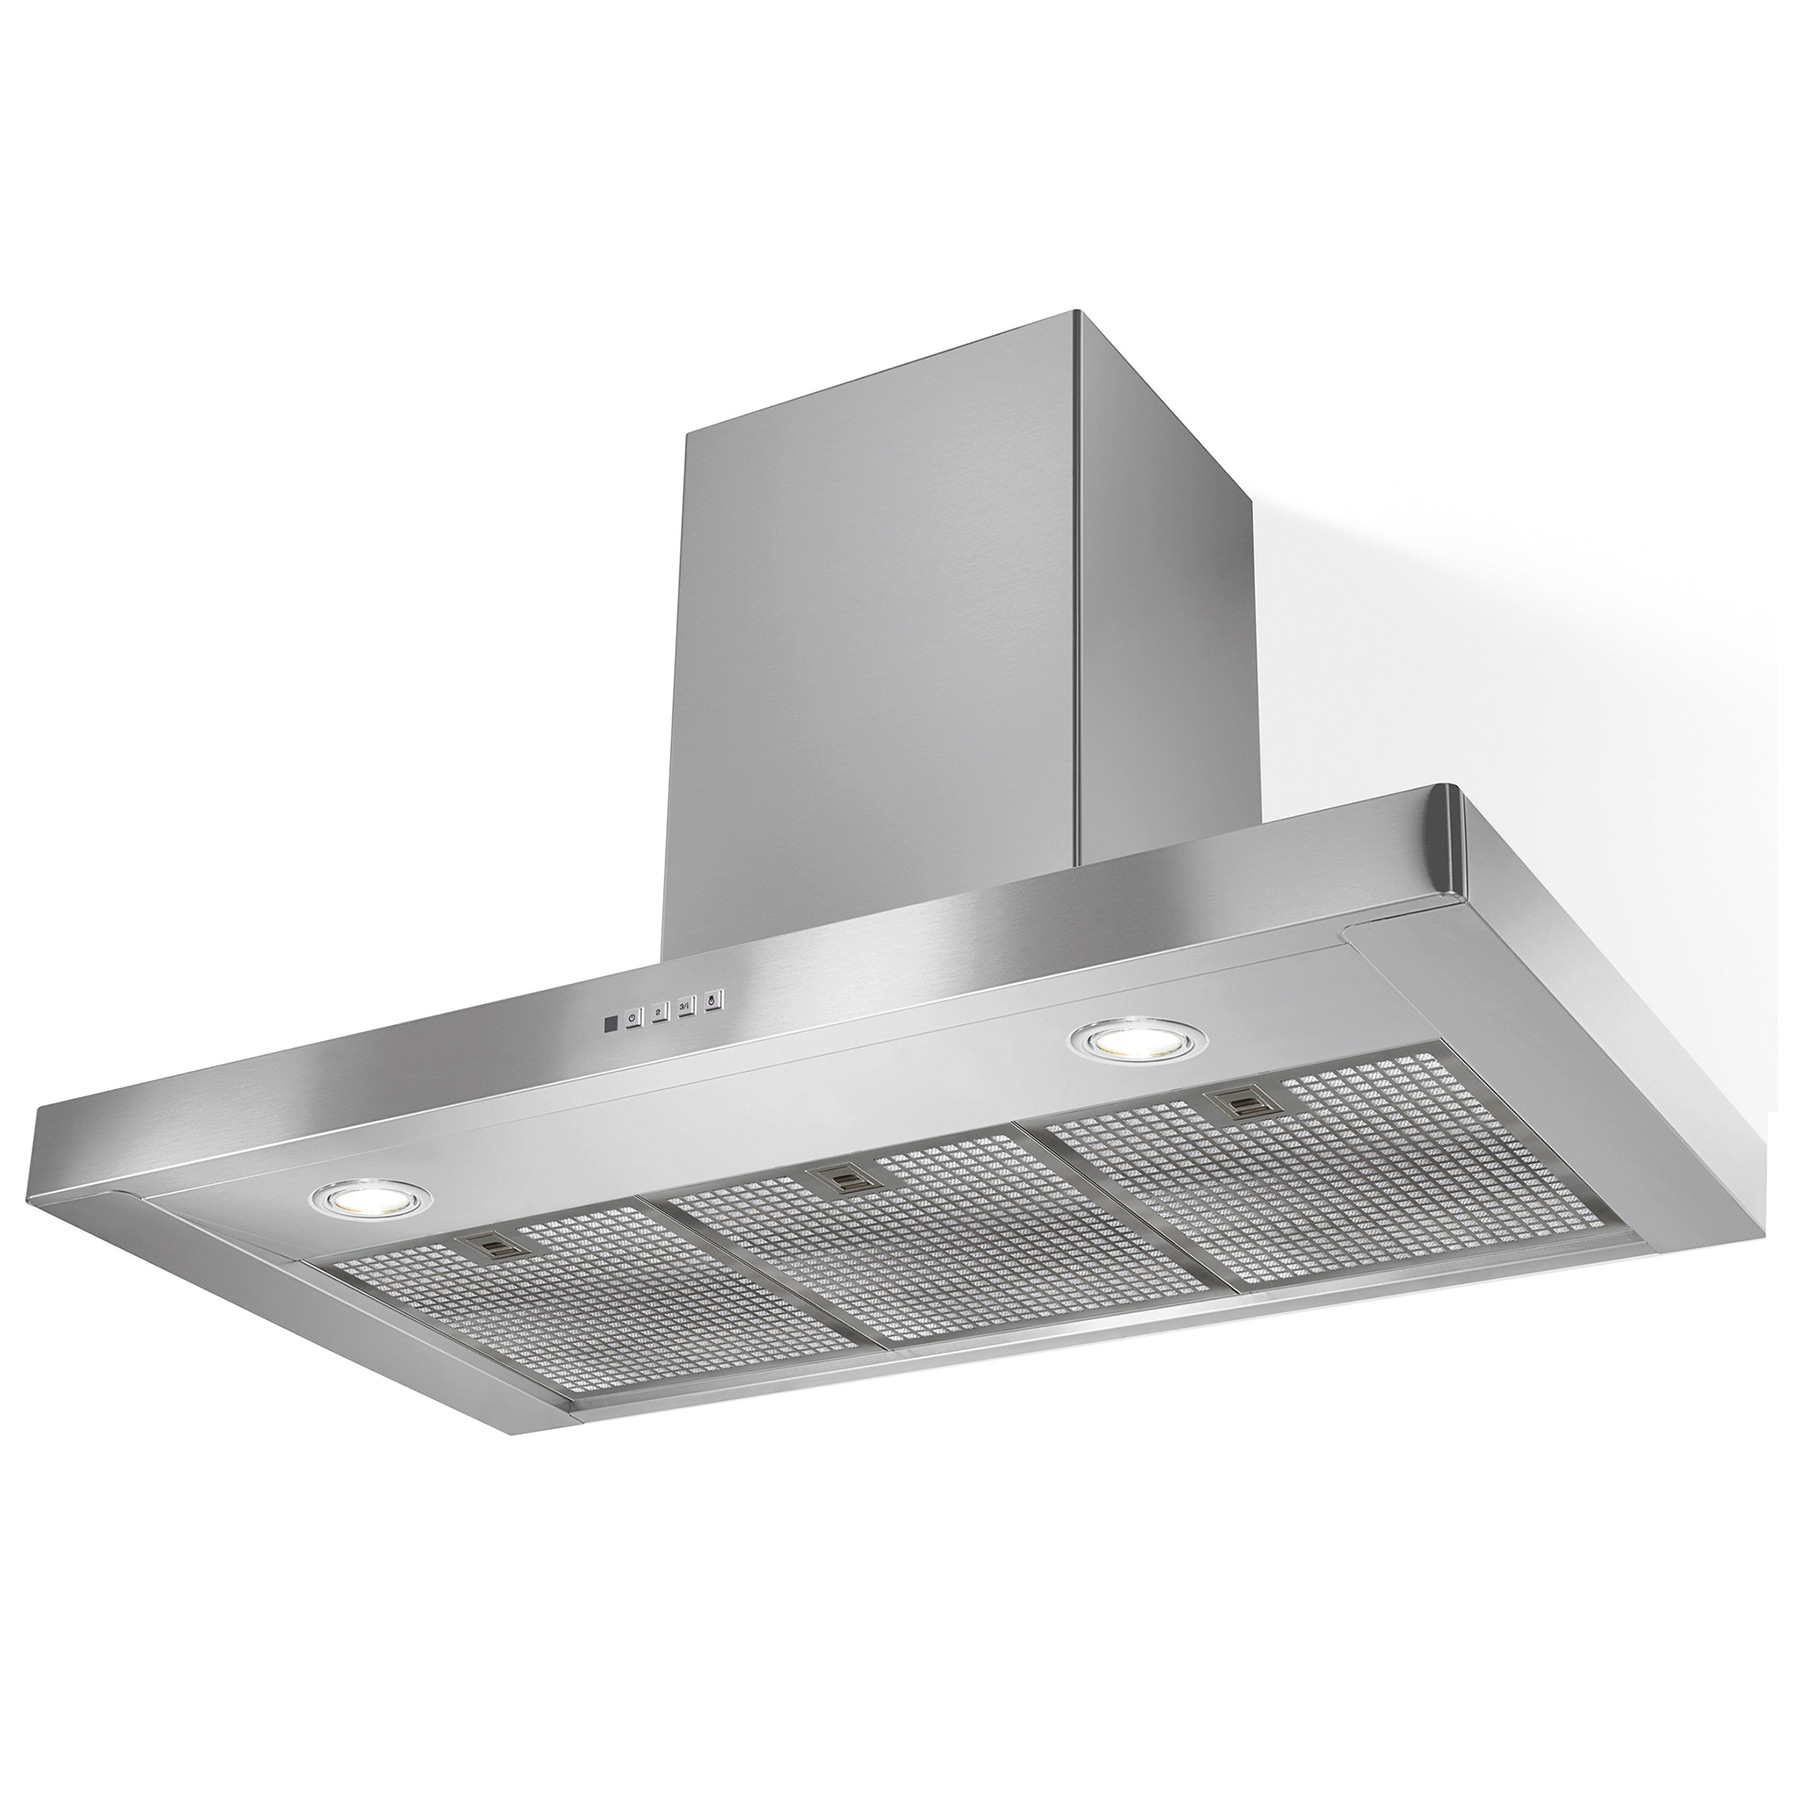 Image of Britannia 544446317 90cm POETICO Flat Hood in St Steel 3 Speed A Rated